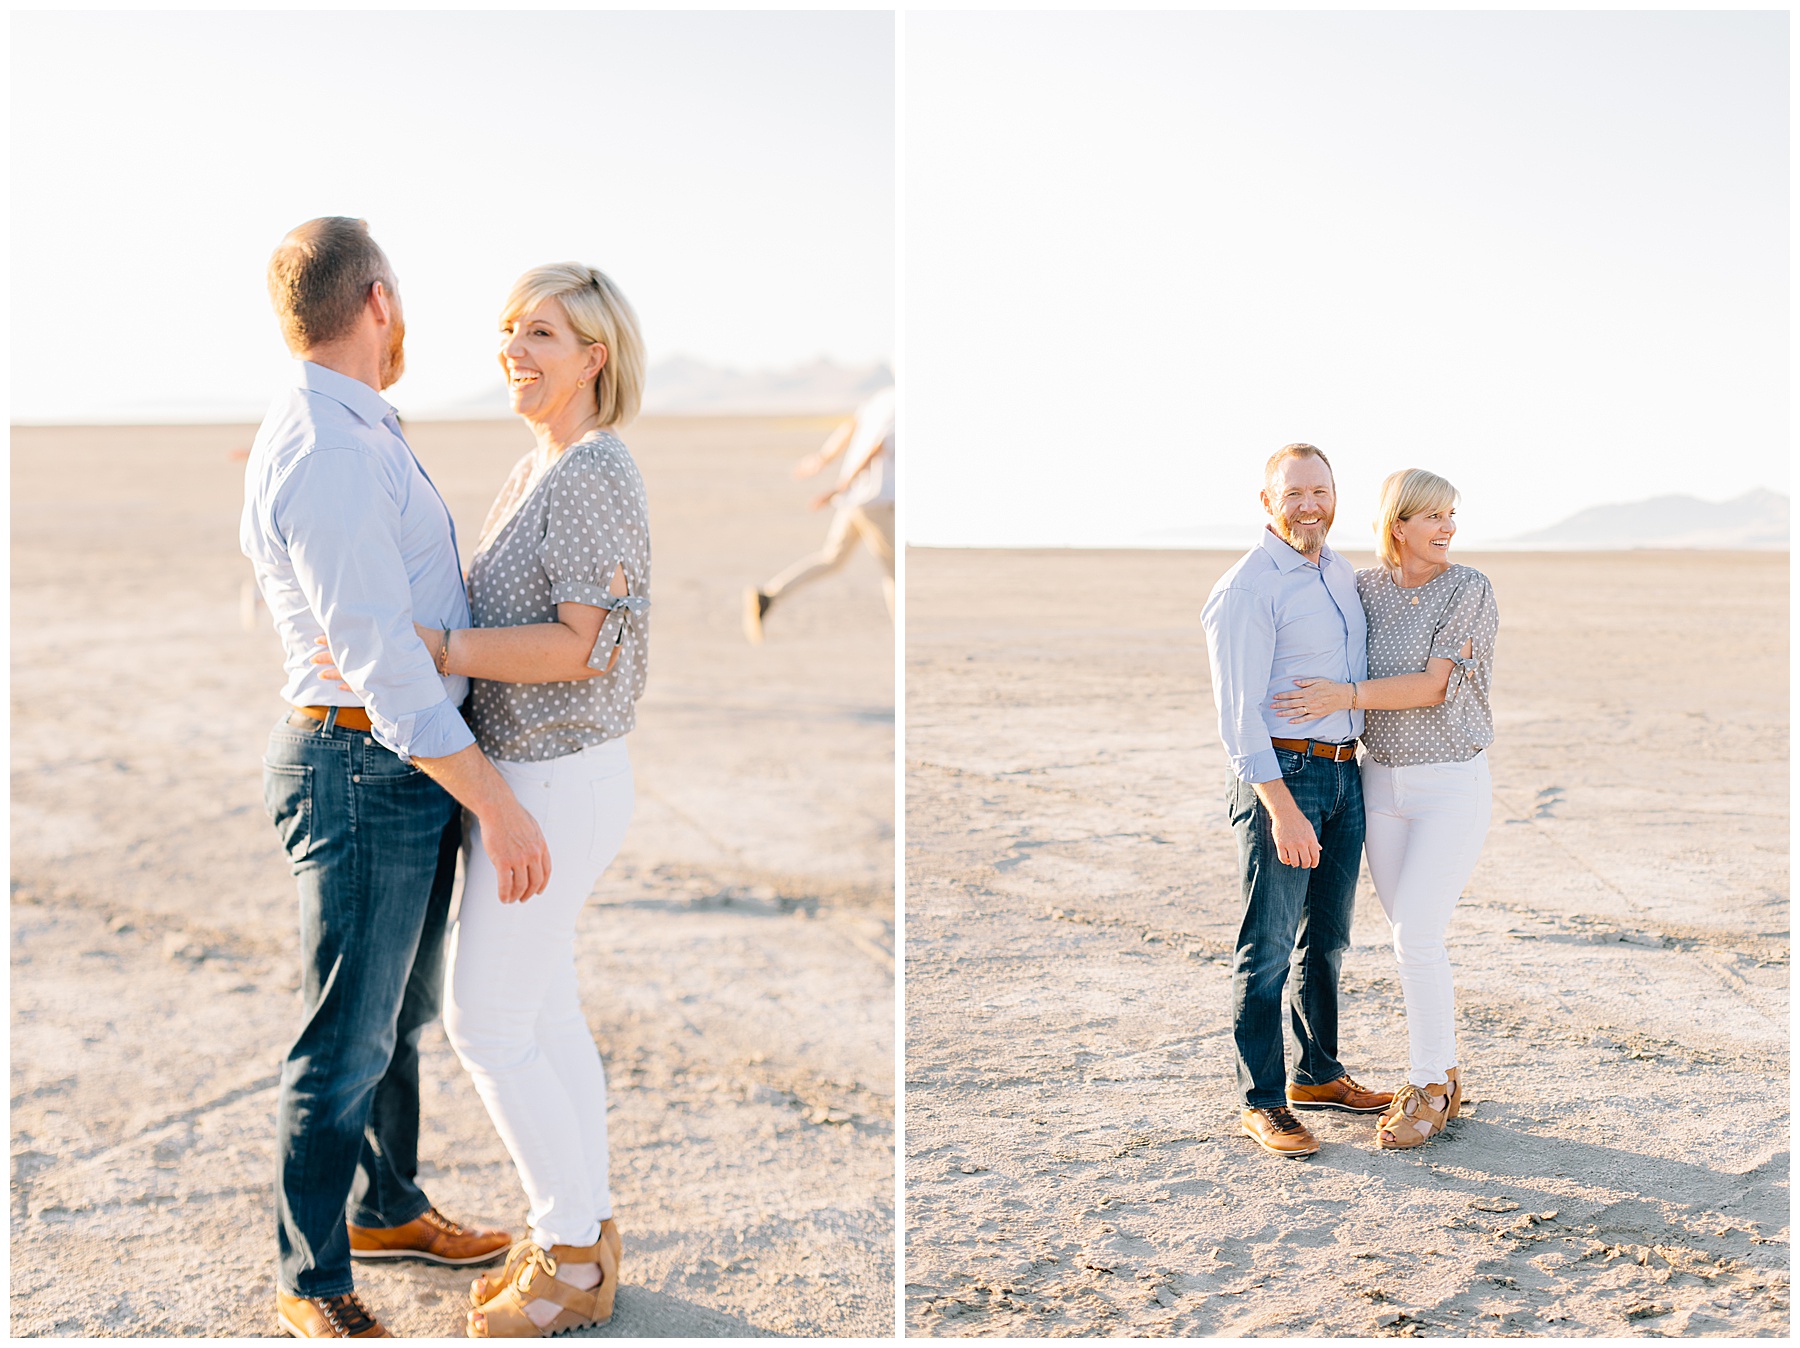 Barney Family | Great Salt Lake Family Pictures